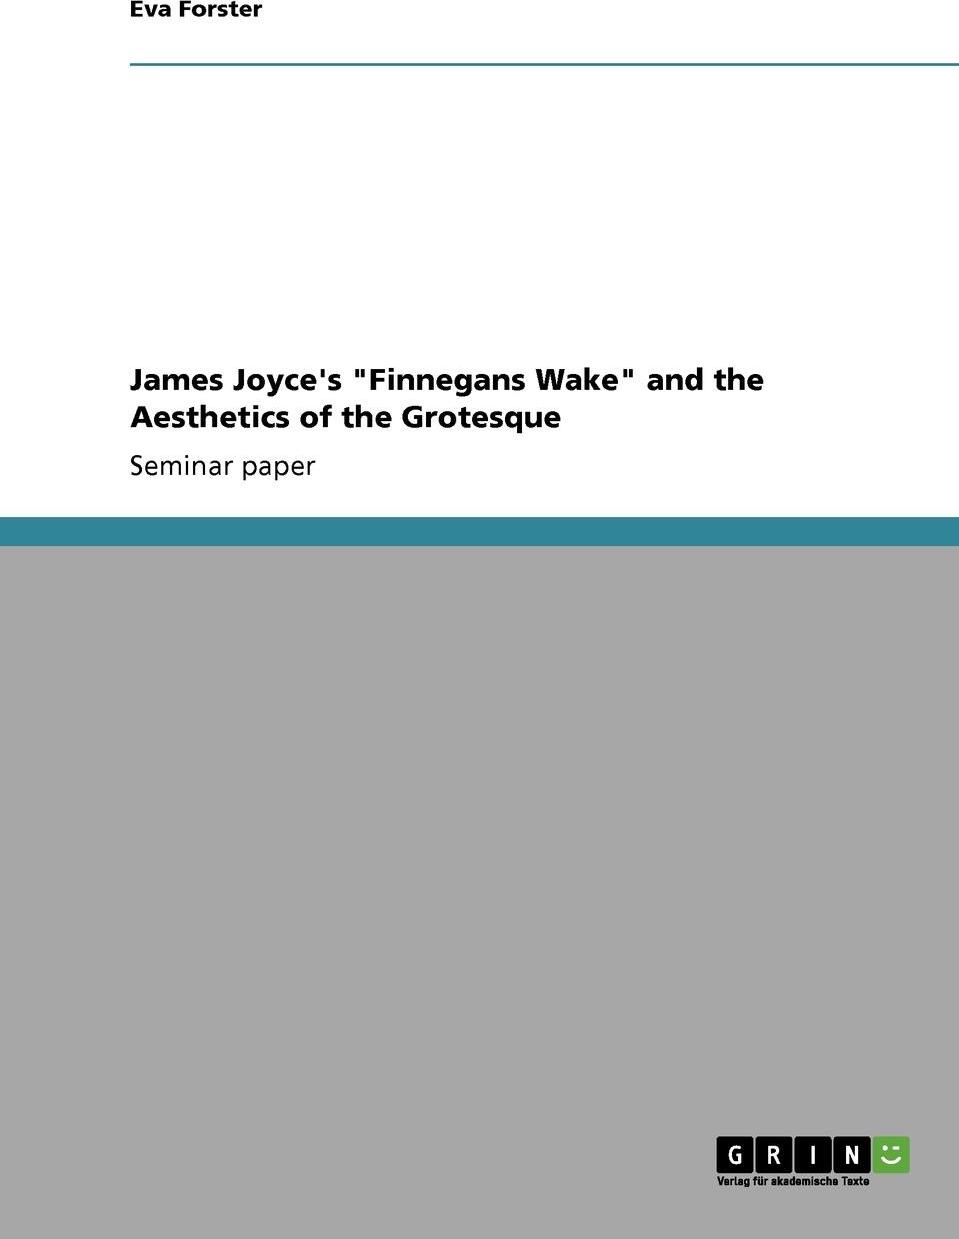 фото James Joyce's "Finnegans Wake" and the Aesthetics of the Grotesque